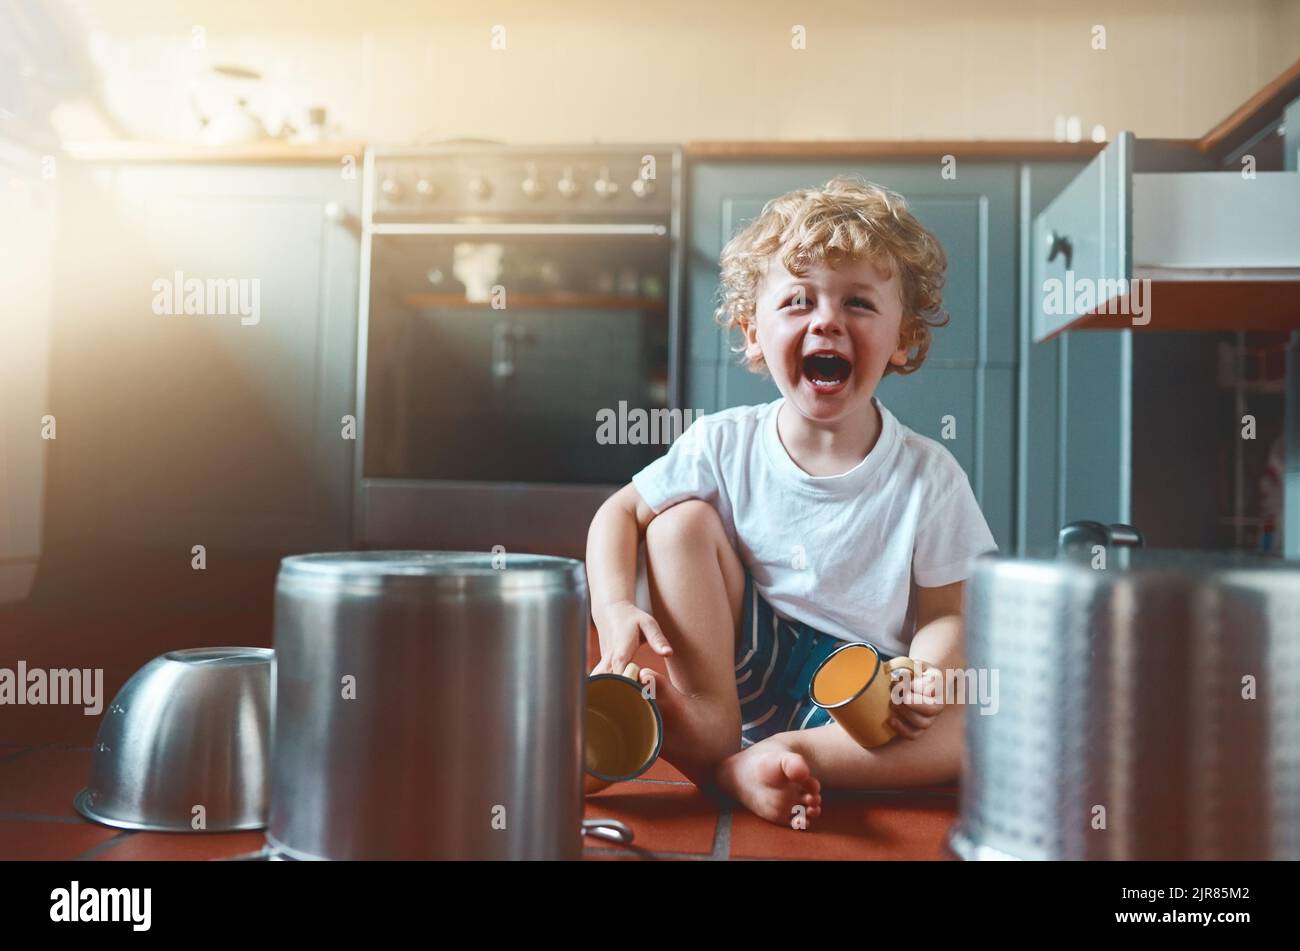 Today he imagined to be a drummer. Portrait of an adorable little boy playing with pots in the kitchen. Stock Photo